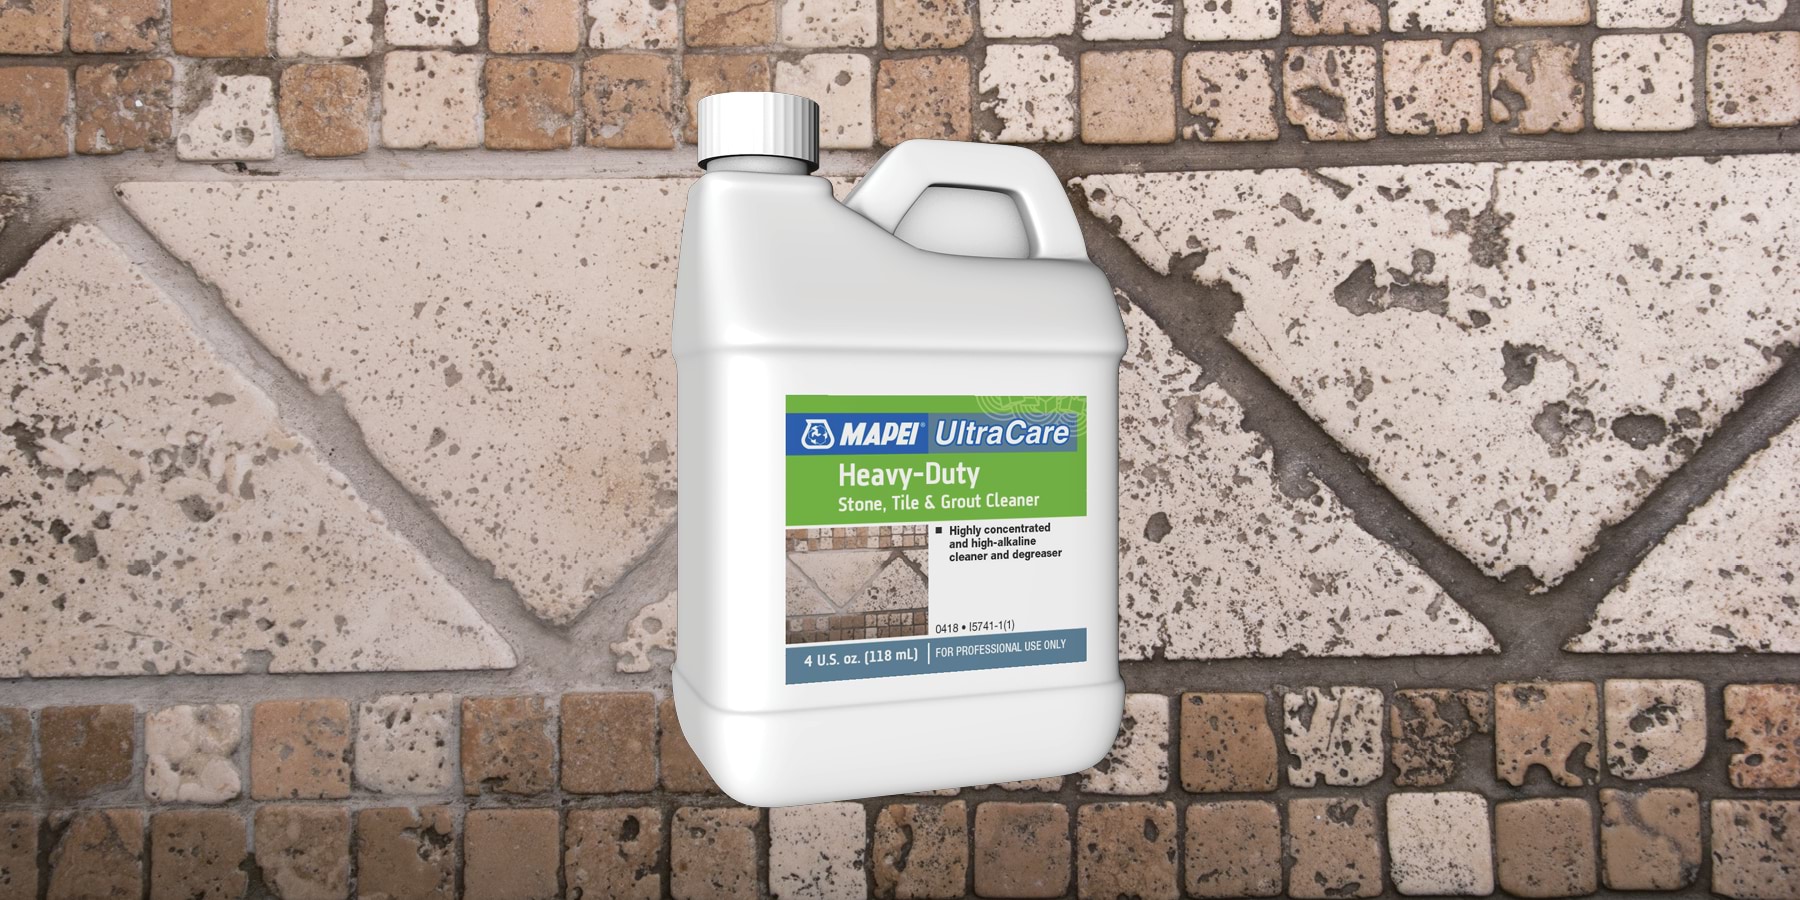 https://cdnmedia.mapei.com/images/librariesprovider67/products-images/28_3000208-ultracare-heavy-duty-stone-cleaner-mobile_e816b677d5e8445cbaa6c6c2999c4c0a.png?sfvrsn=6925146c_0